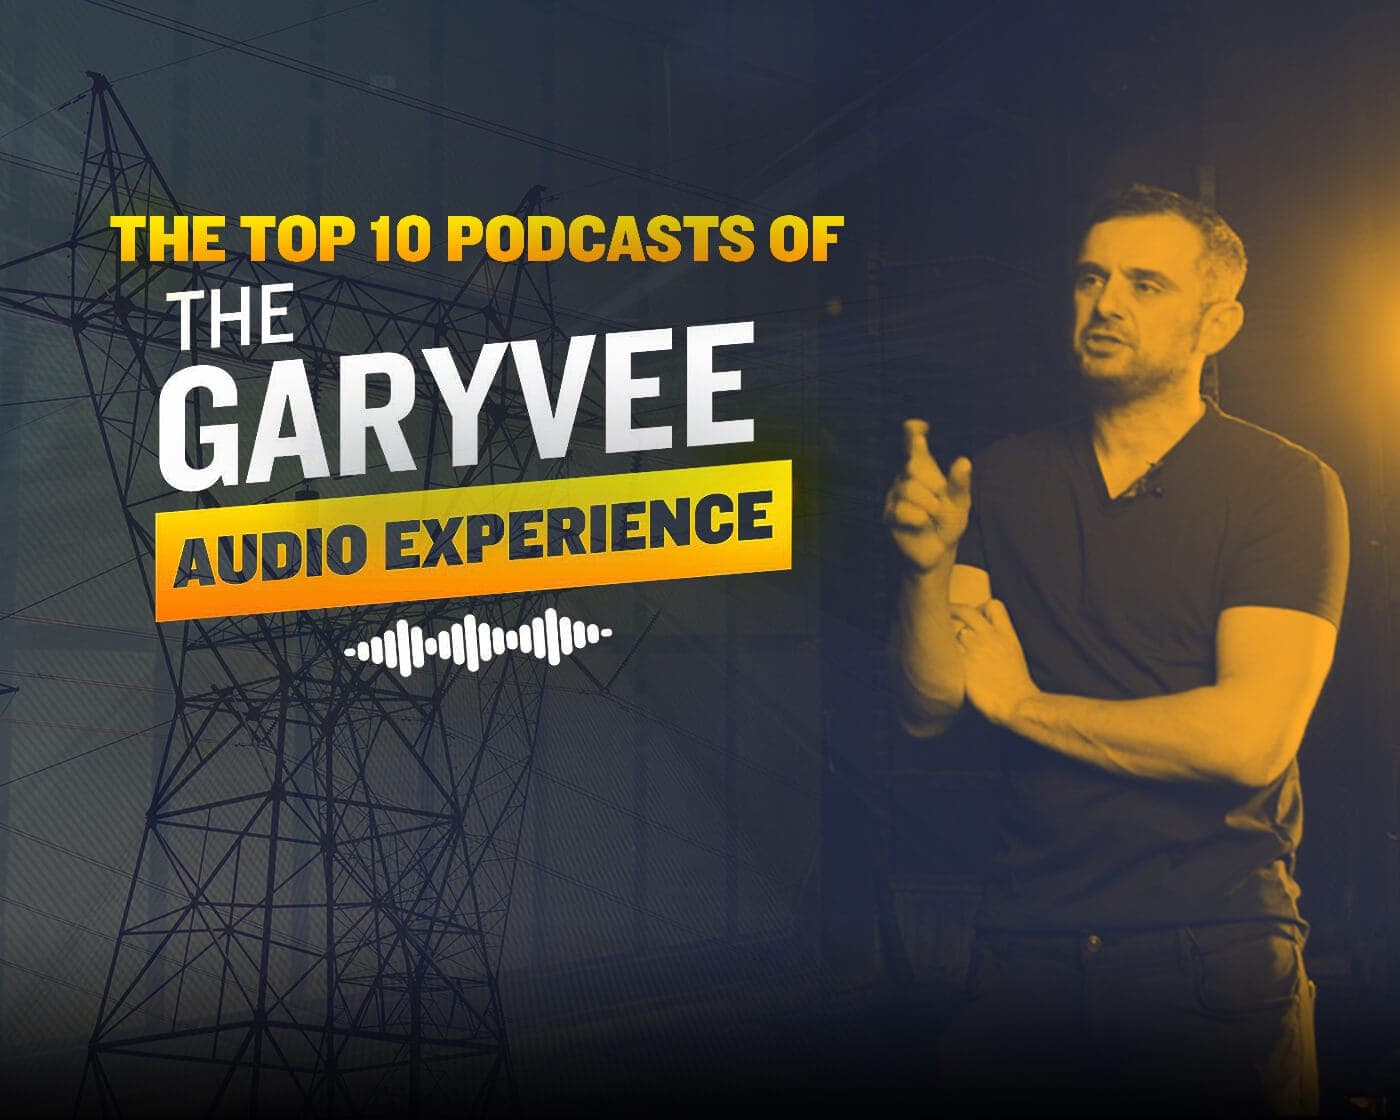 The Top 10 Podcasts From The GaryVee Audio Experience